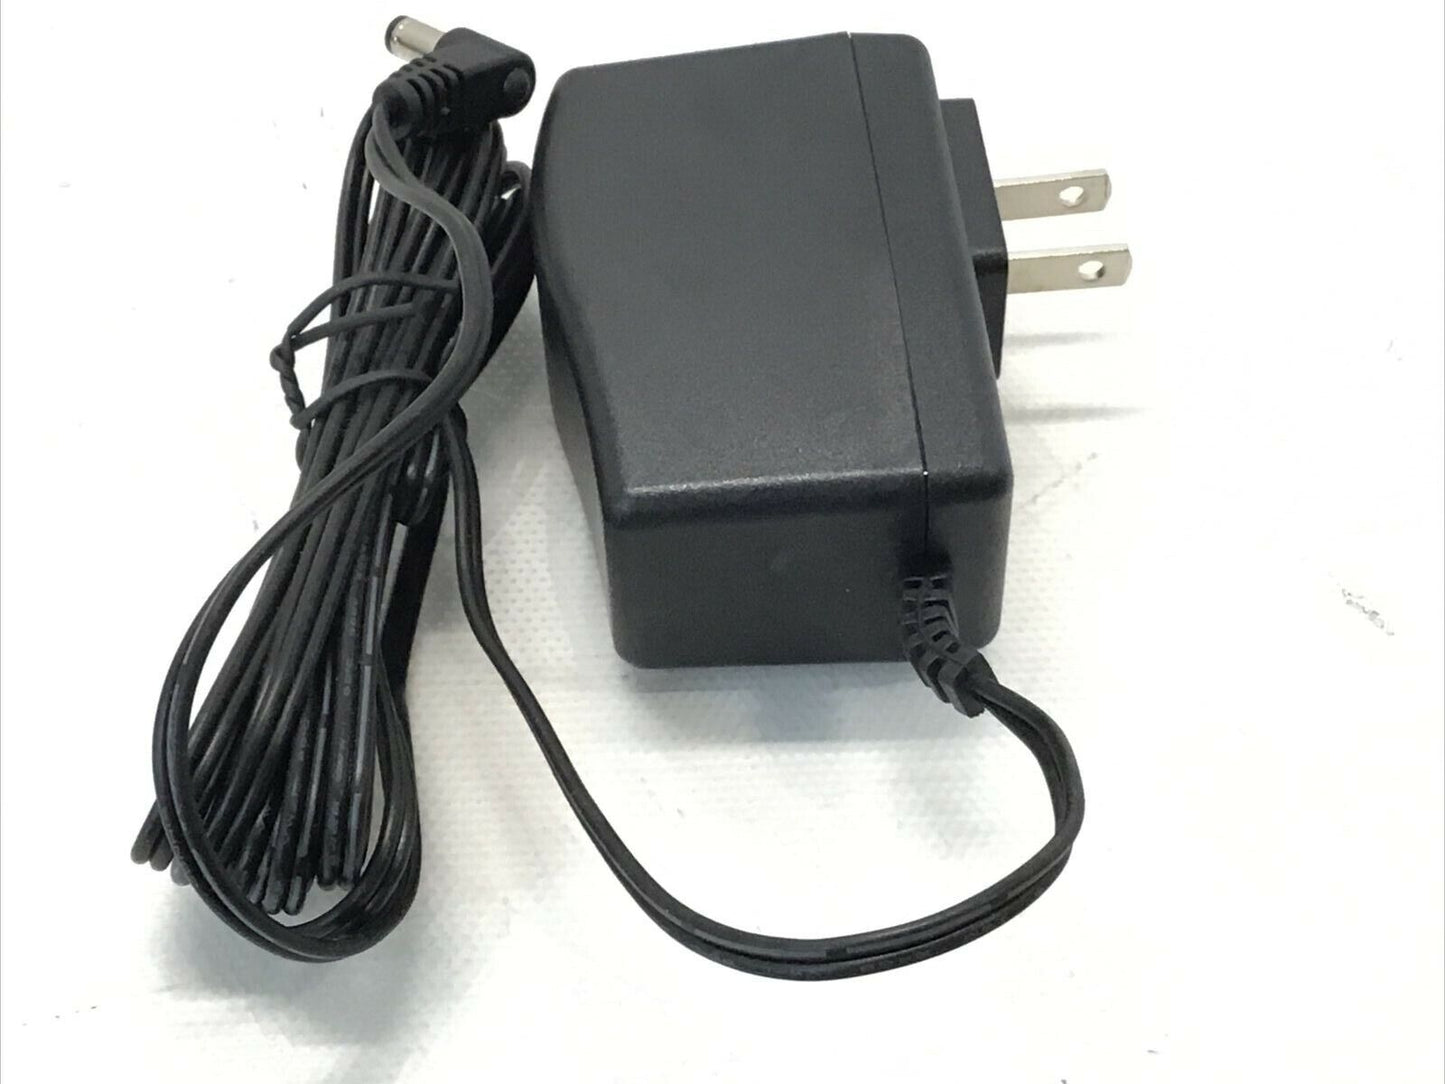 (10x) 15V 1.2A Charger AC Adapter Power Supply CYSD15-150120-A 5.0mm x 2.5mm